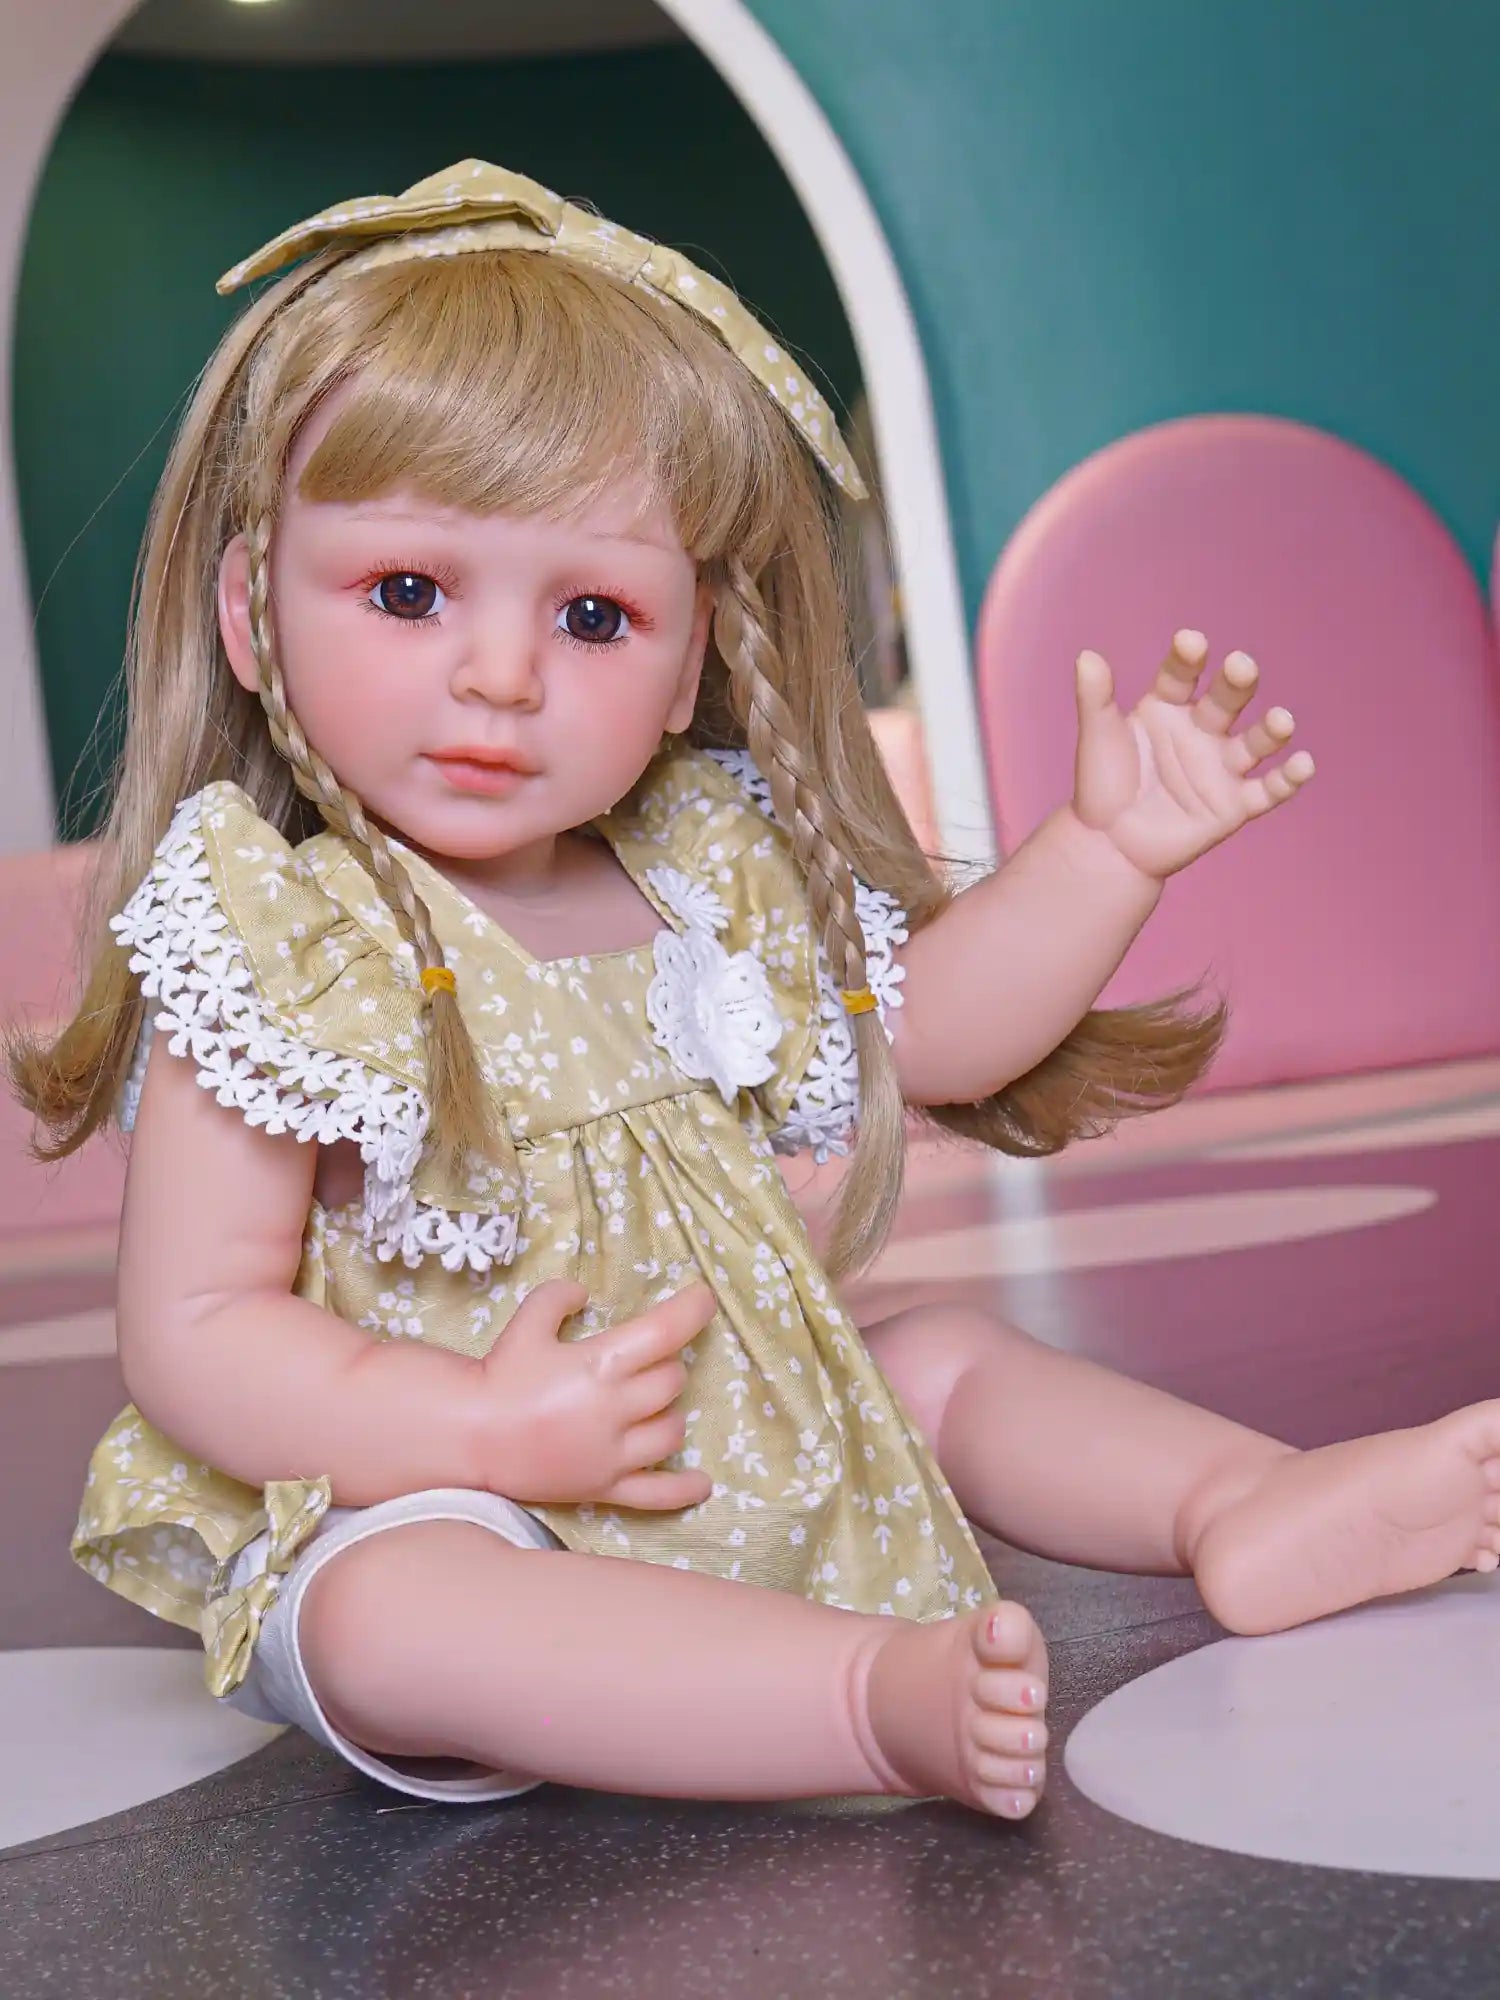 Realistic doll with braided hair, wearing a patterned dress, poised in a playful wave.